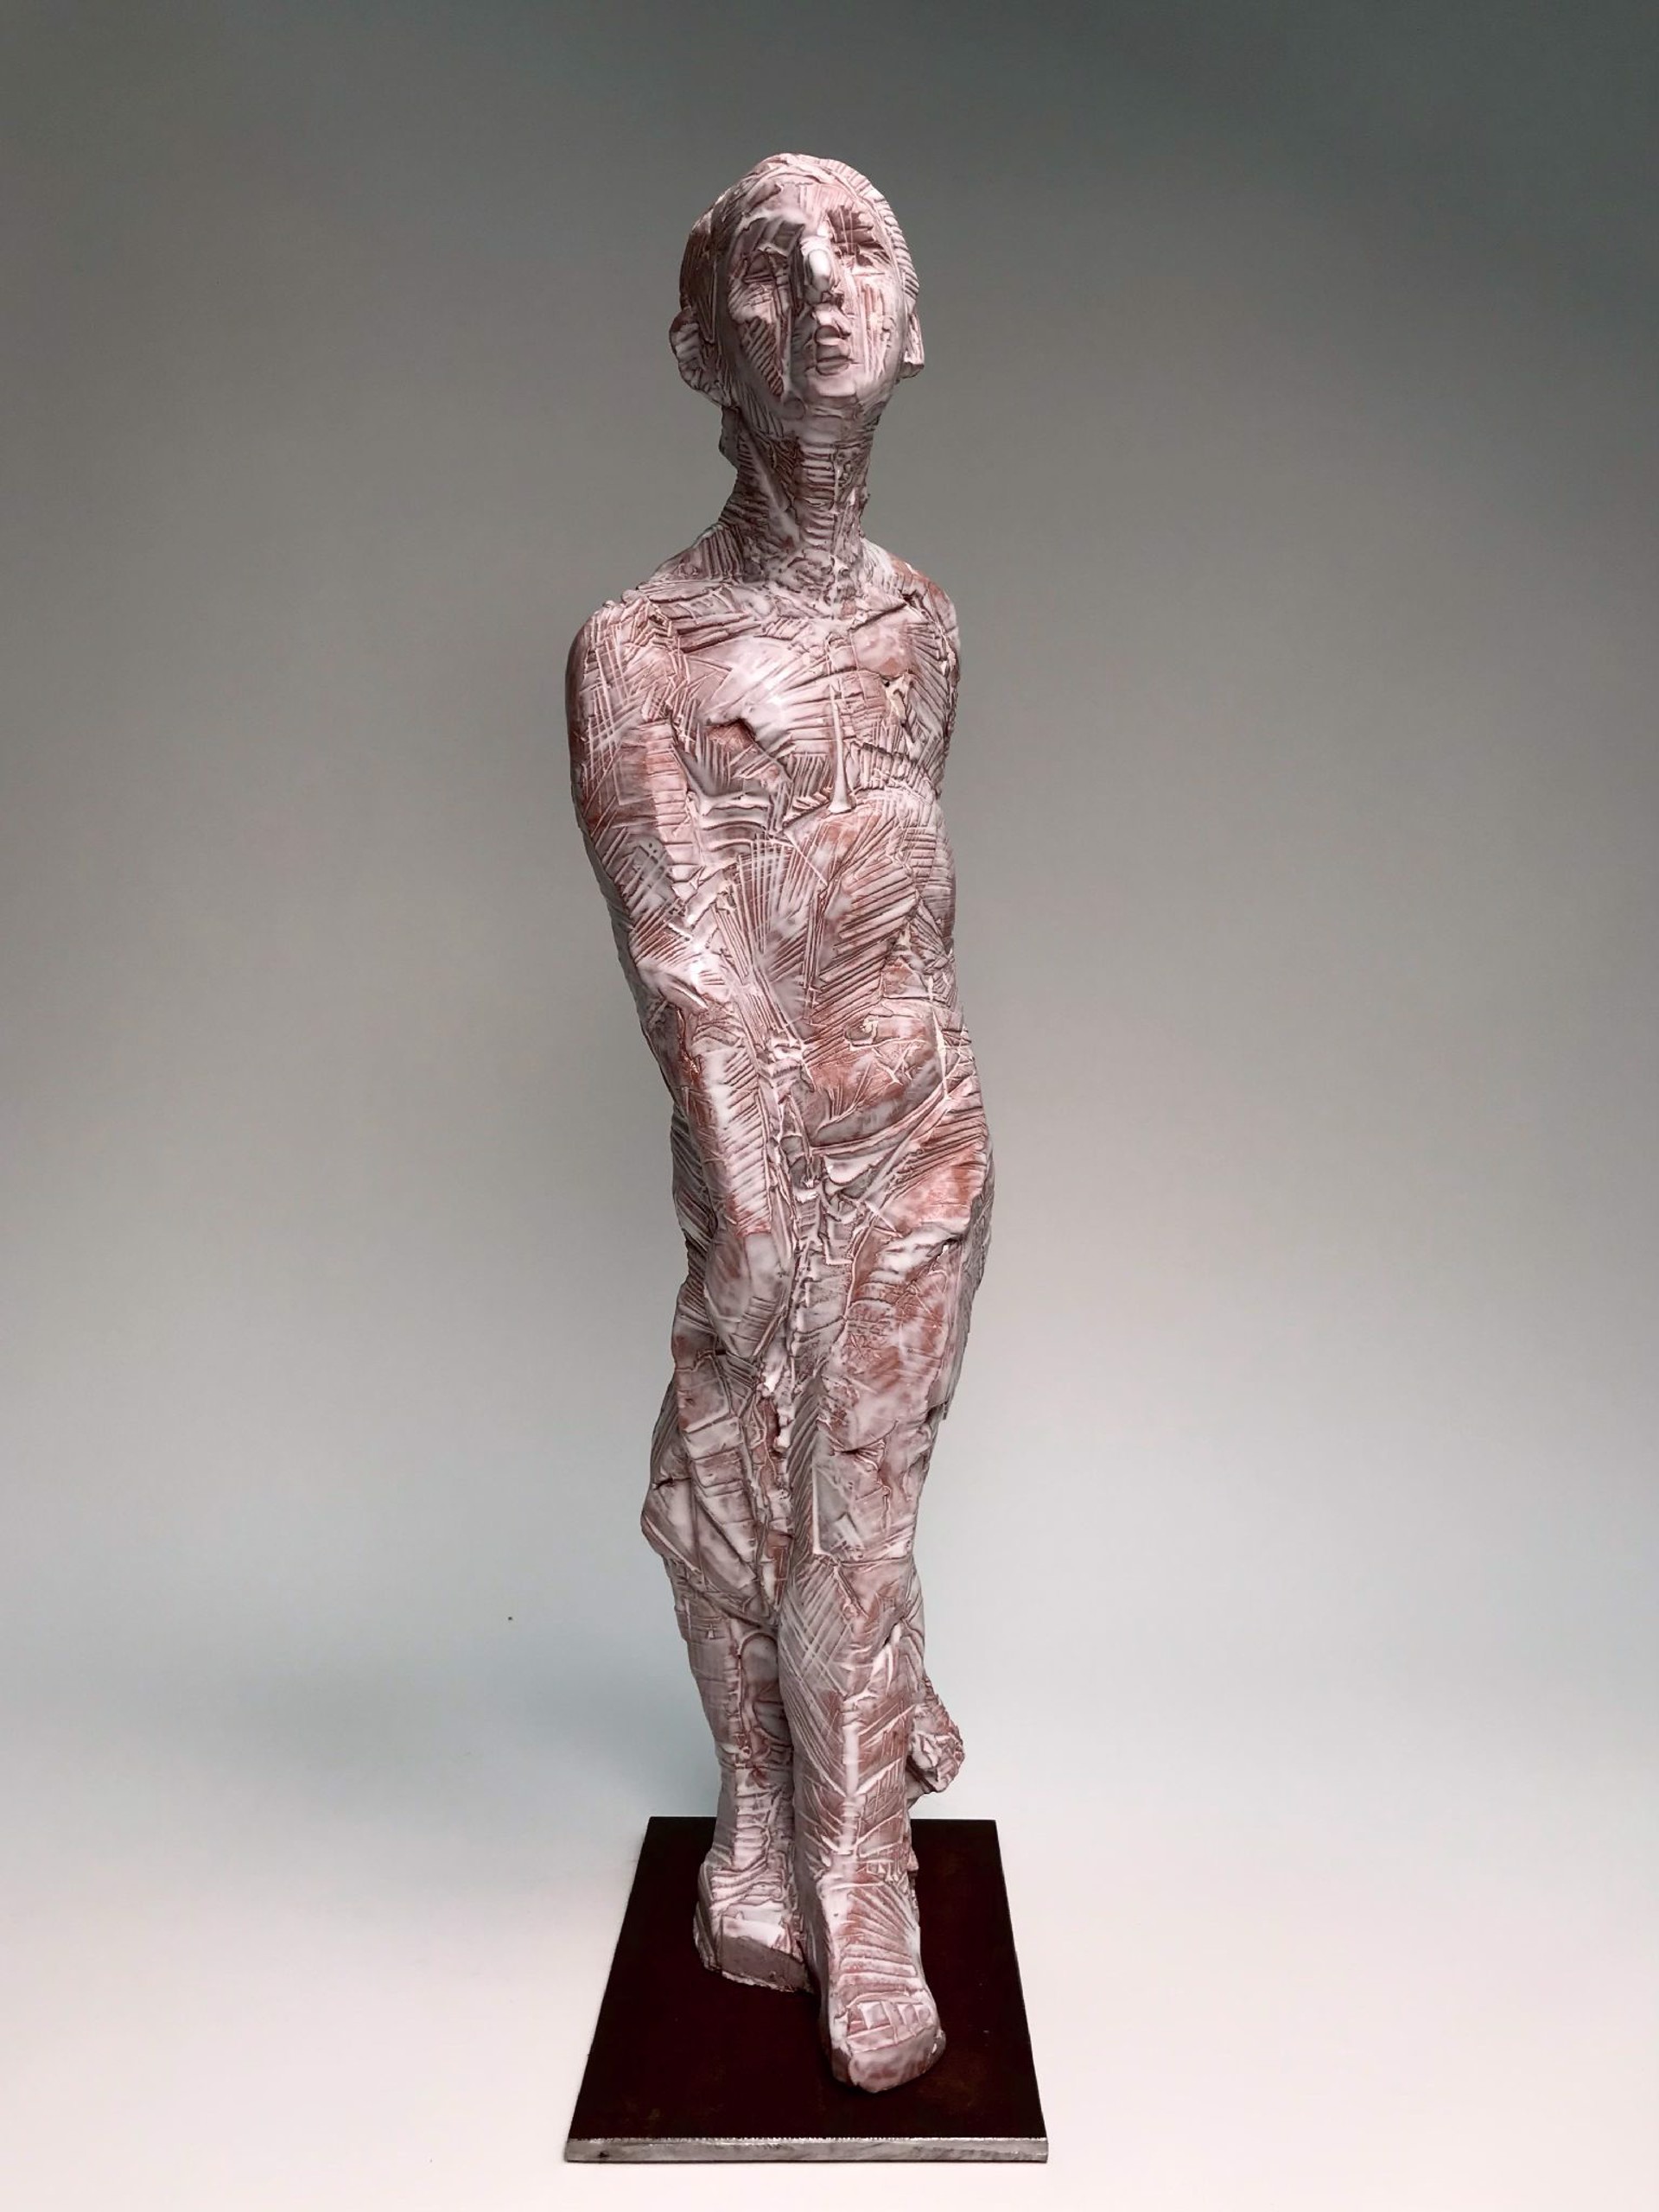 Untitled Figure 2 by Michael O'Keefe